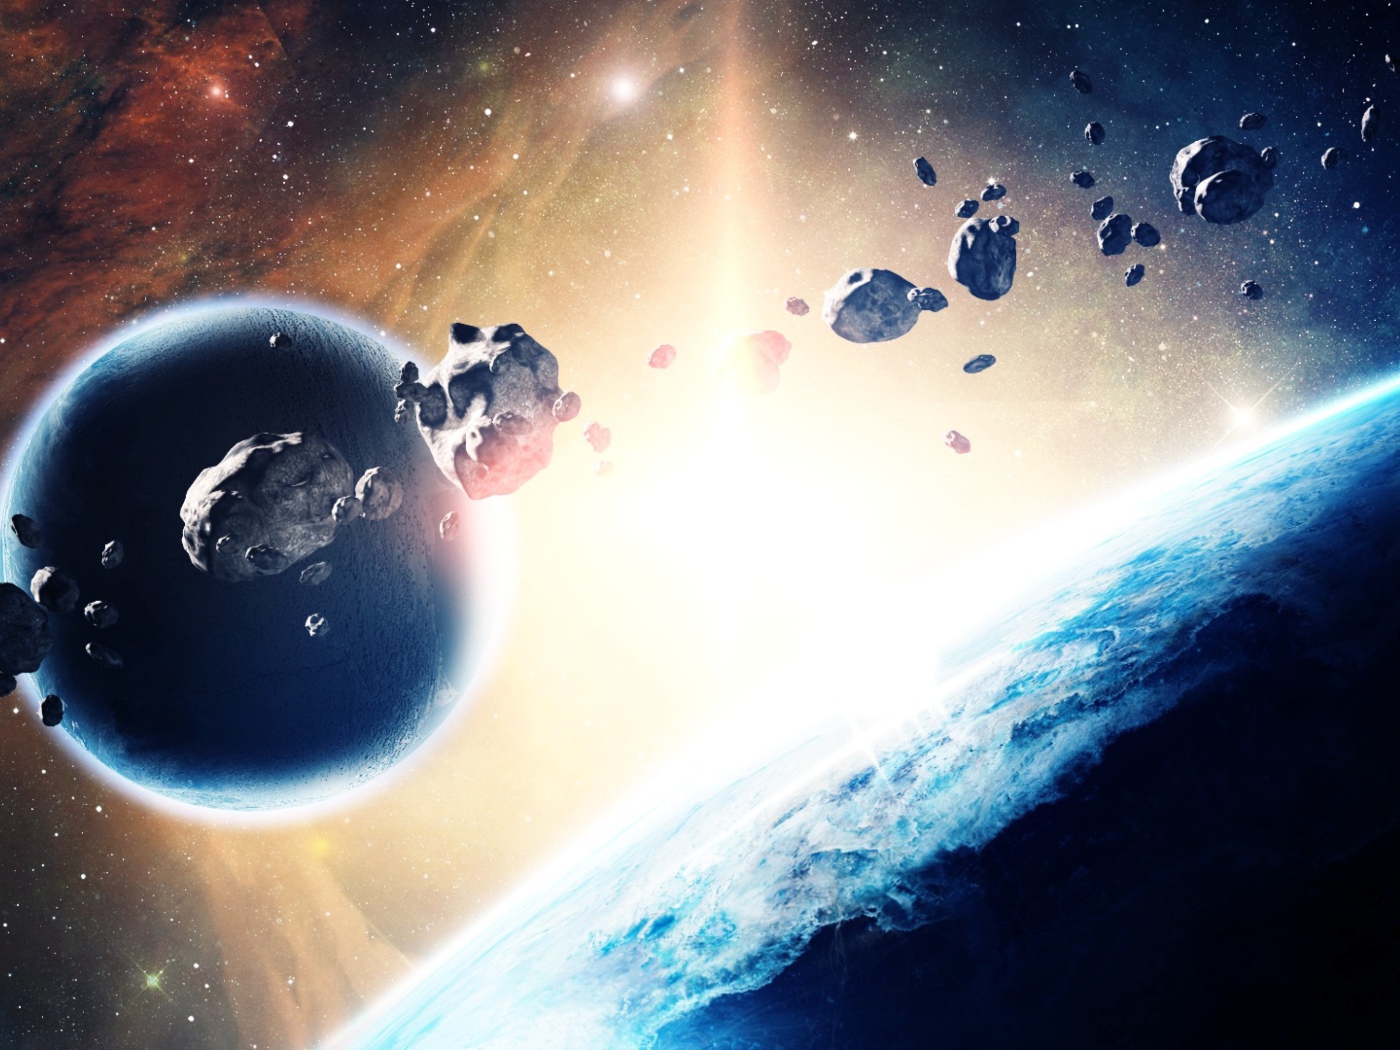 Asteroids In Space wallpaper 1400x1050